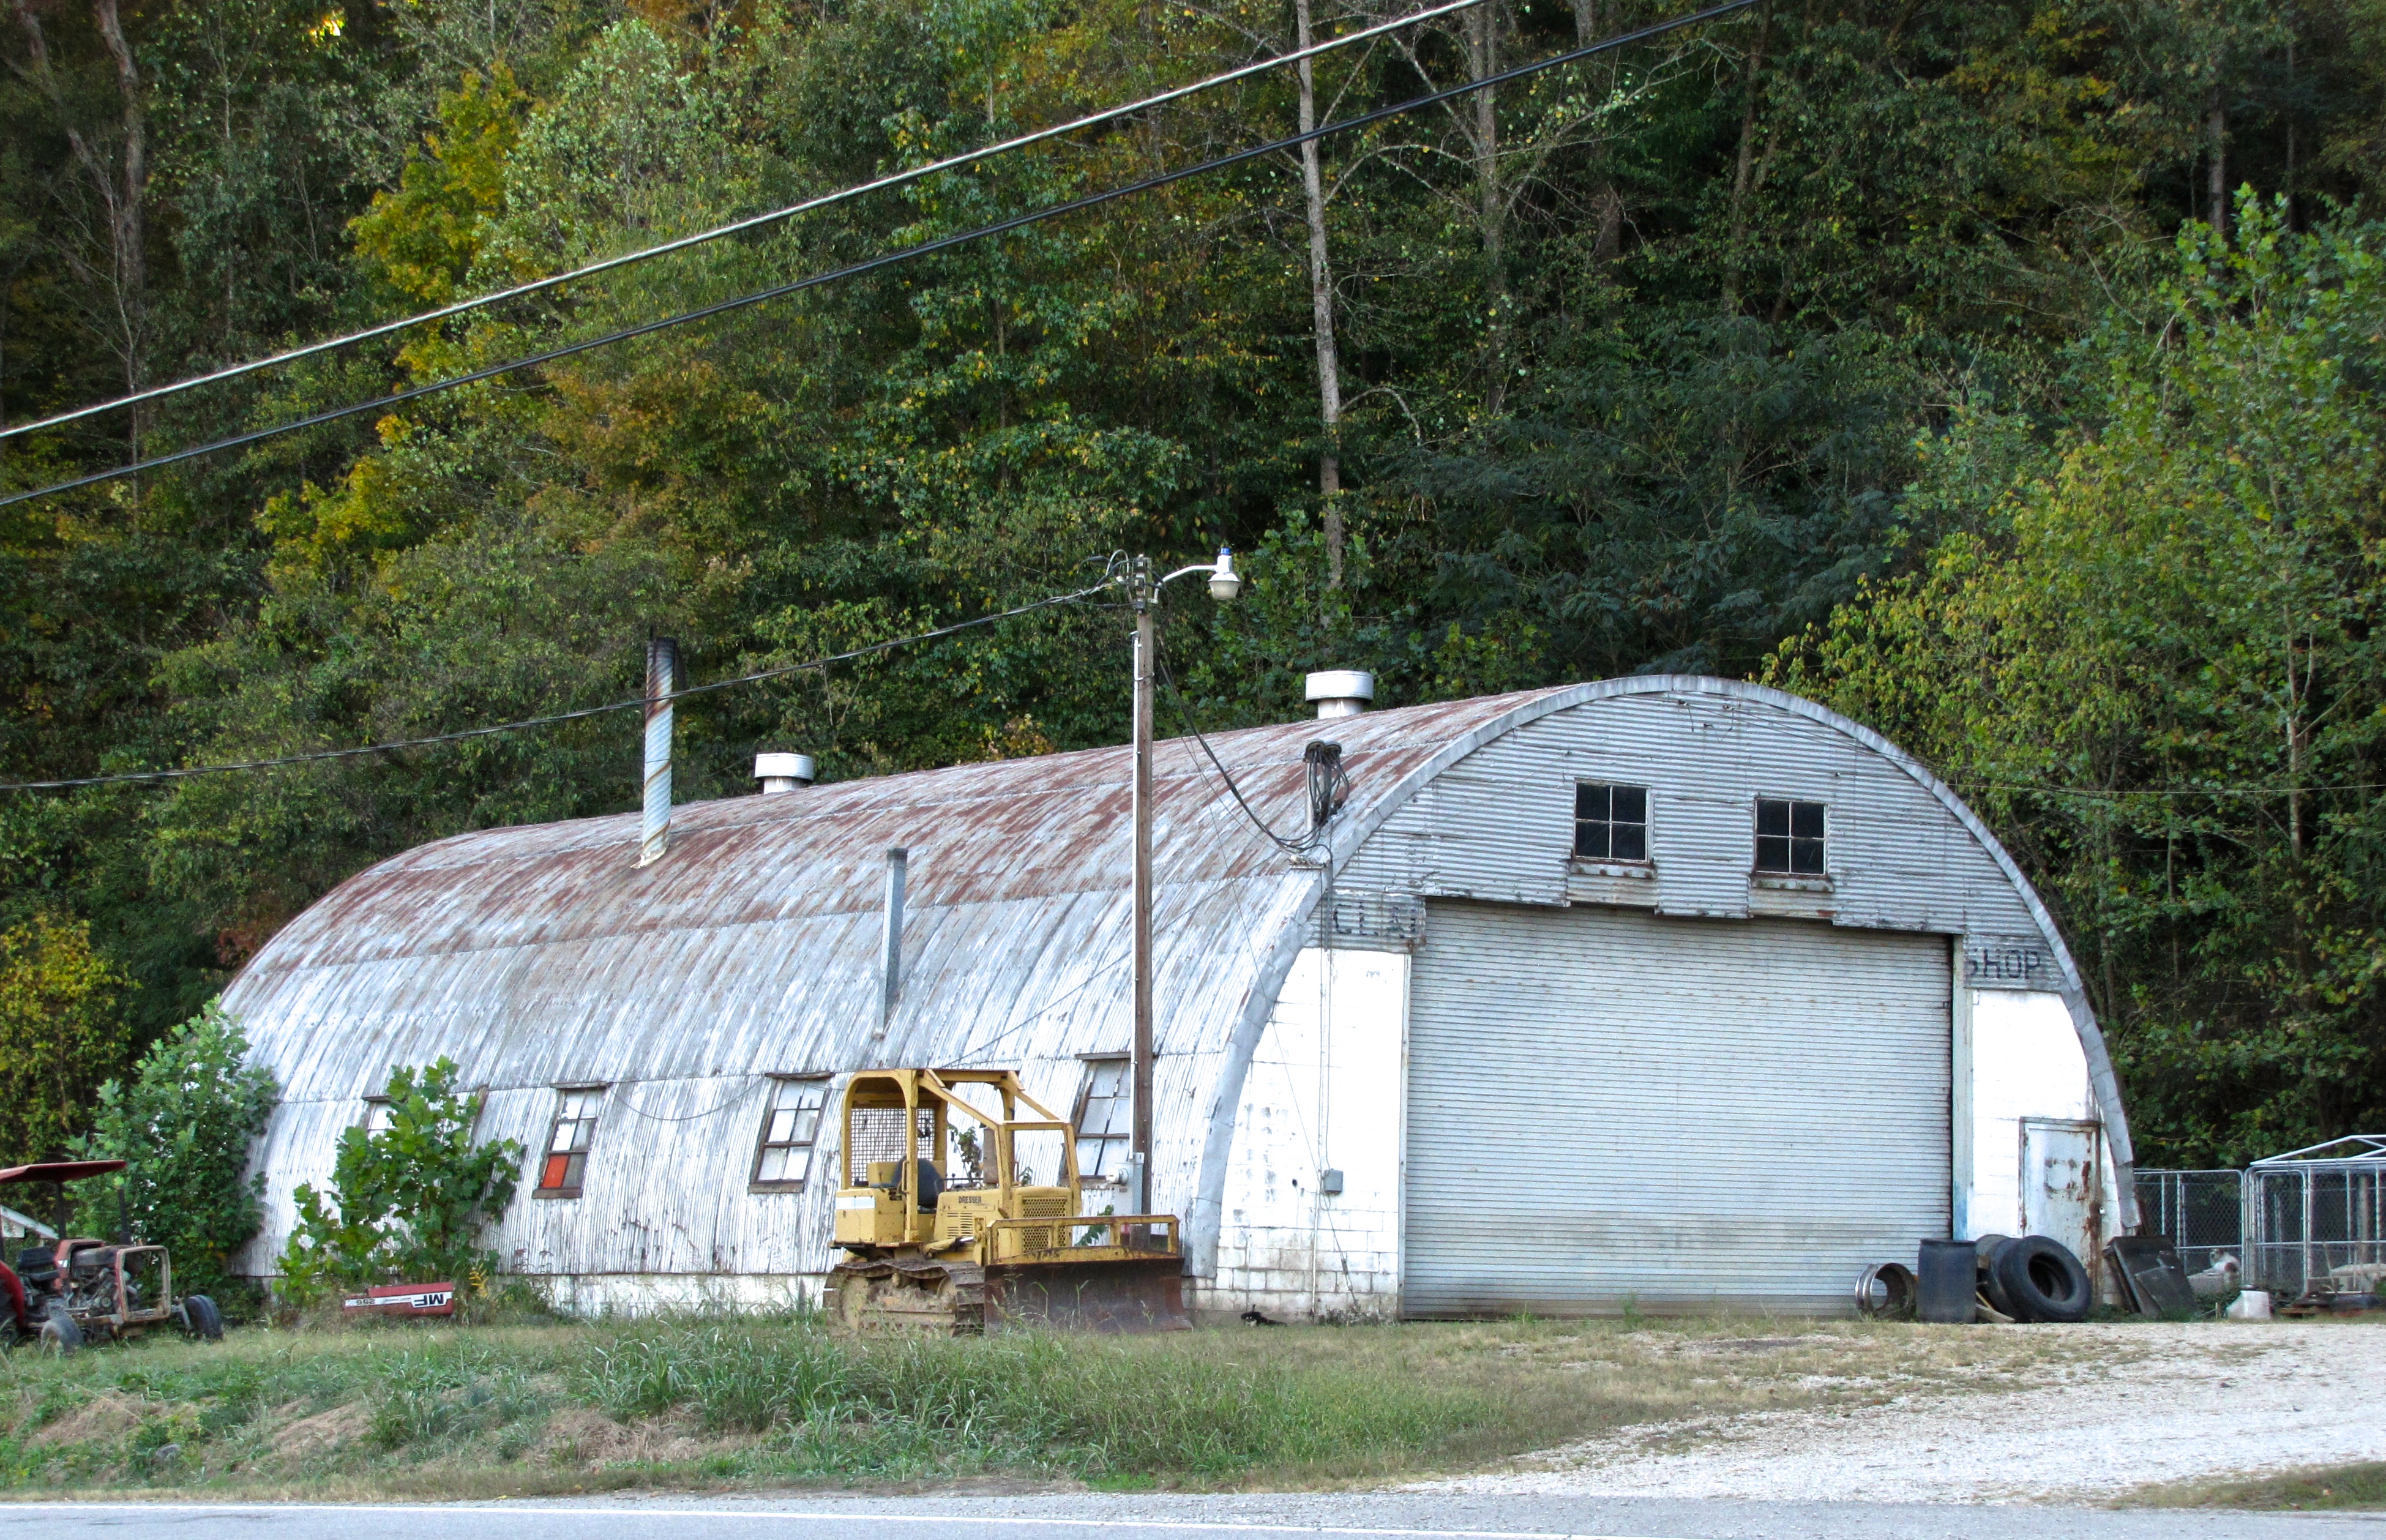 quonset hut in South Londonderry, VT